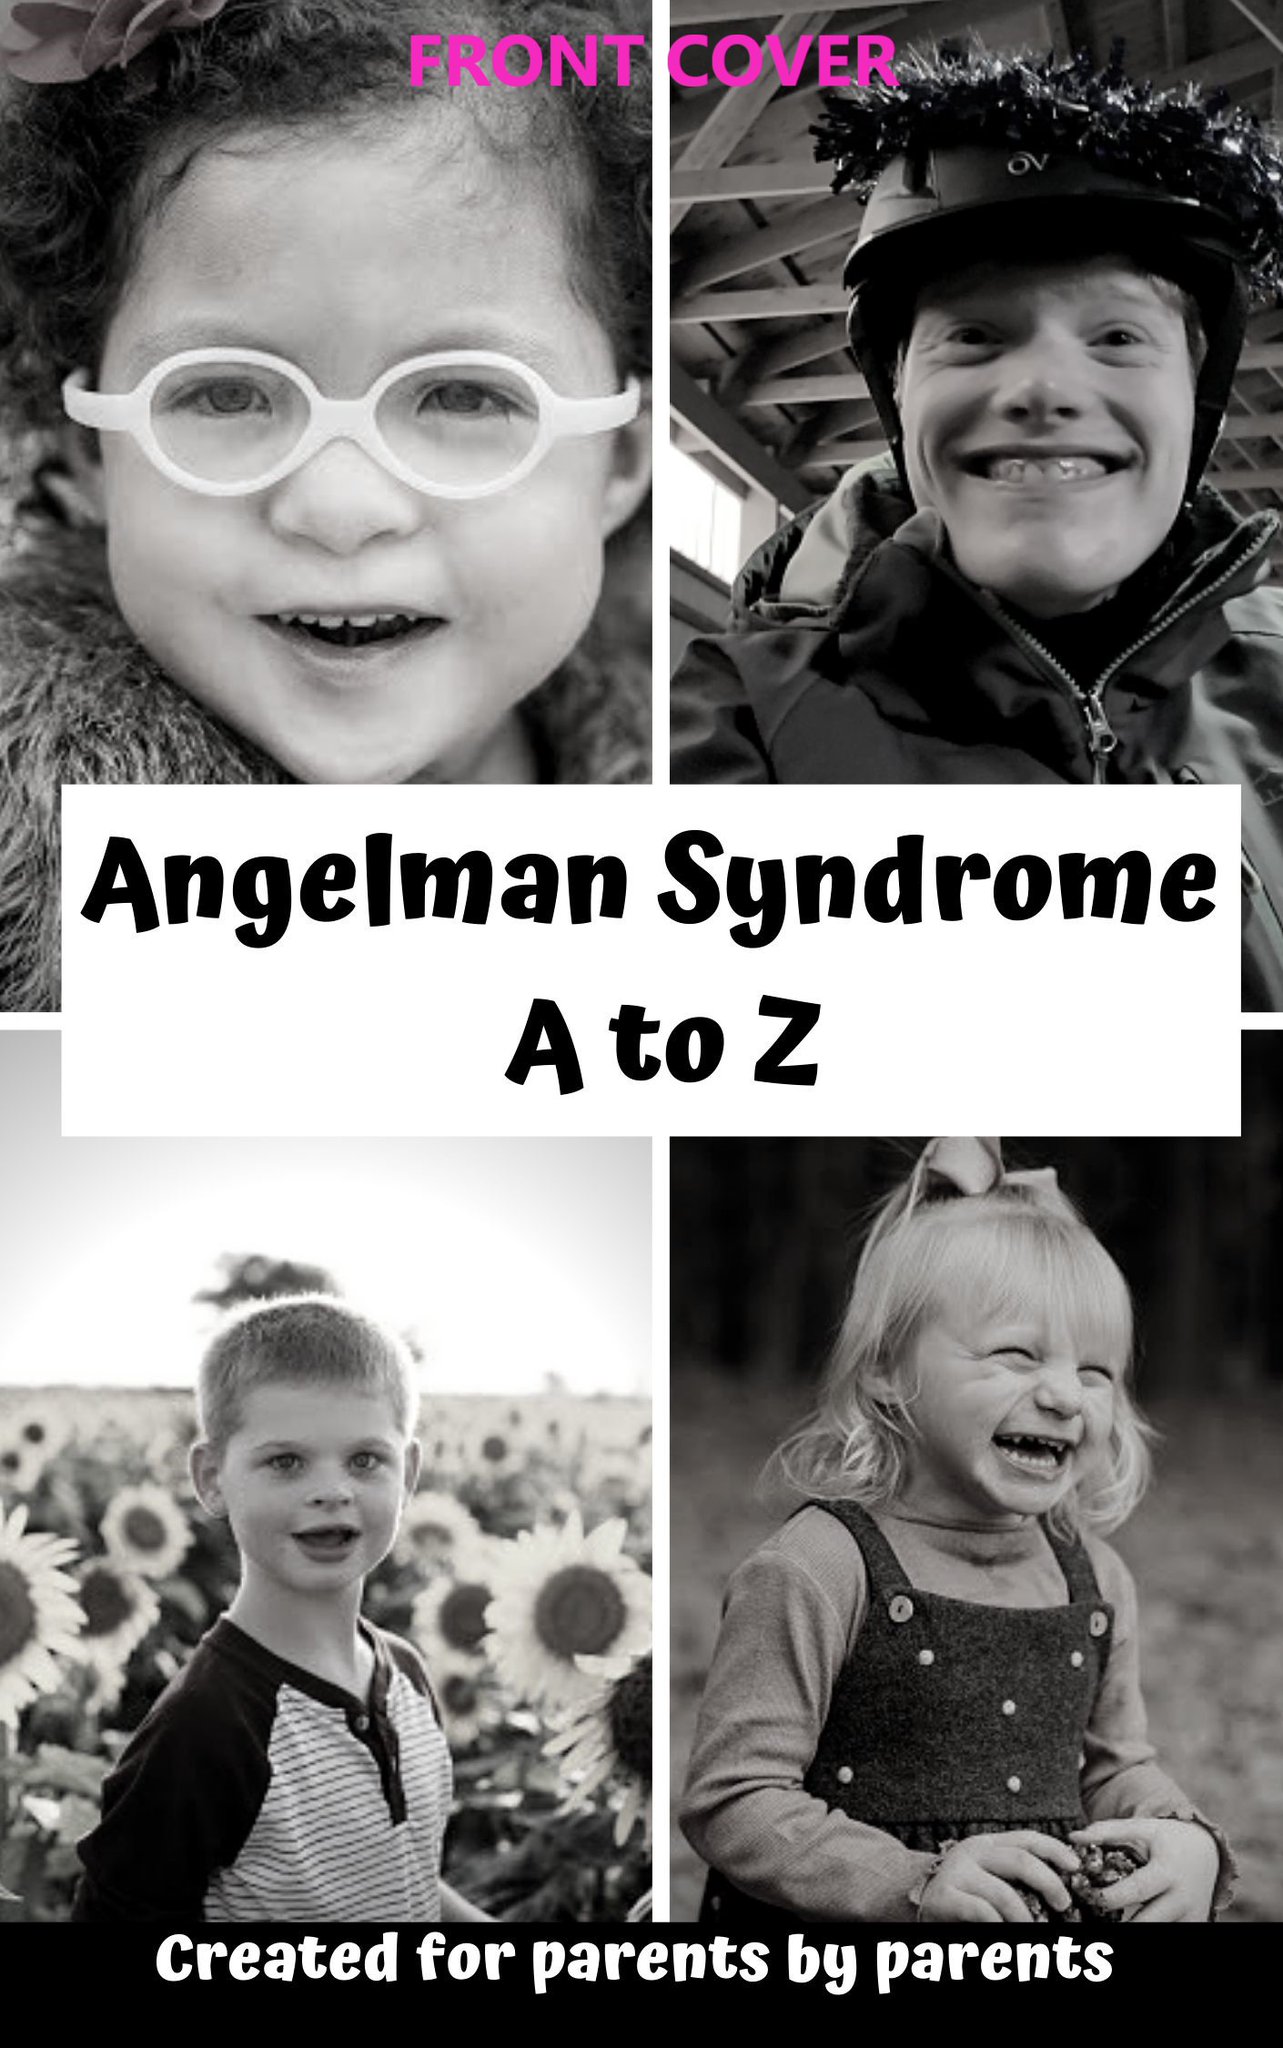 Angelmansyndromefdn A Twitter We Teamed Up With Angelmantoday For Their Angelmanphotocontest The Top 12 Winning Photos Will Be On The Cover Of The 4th Edition Of Angelman A To Z Stay